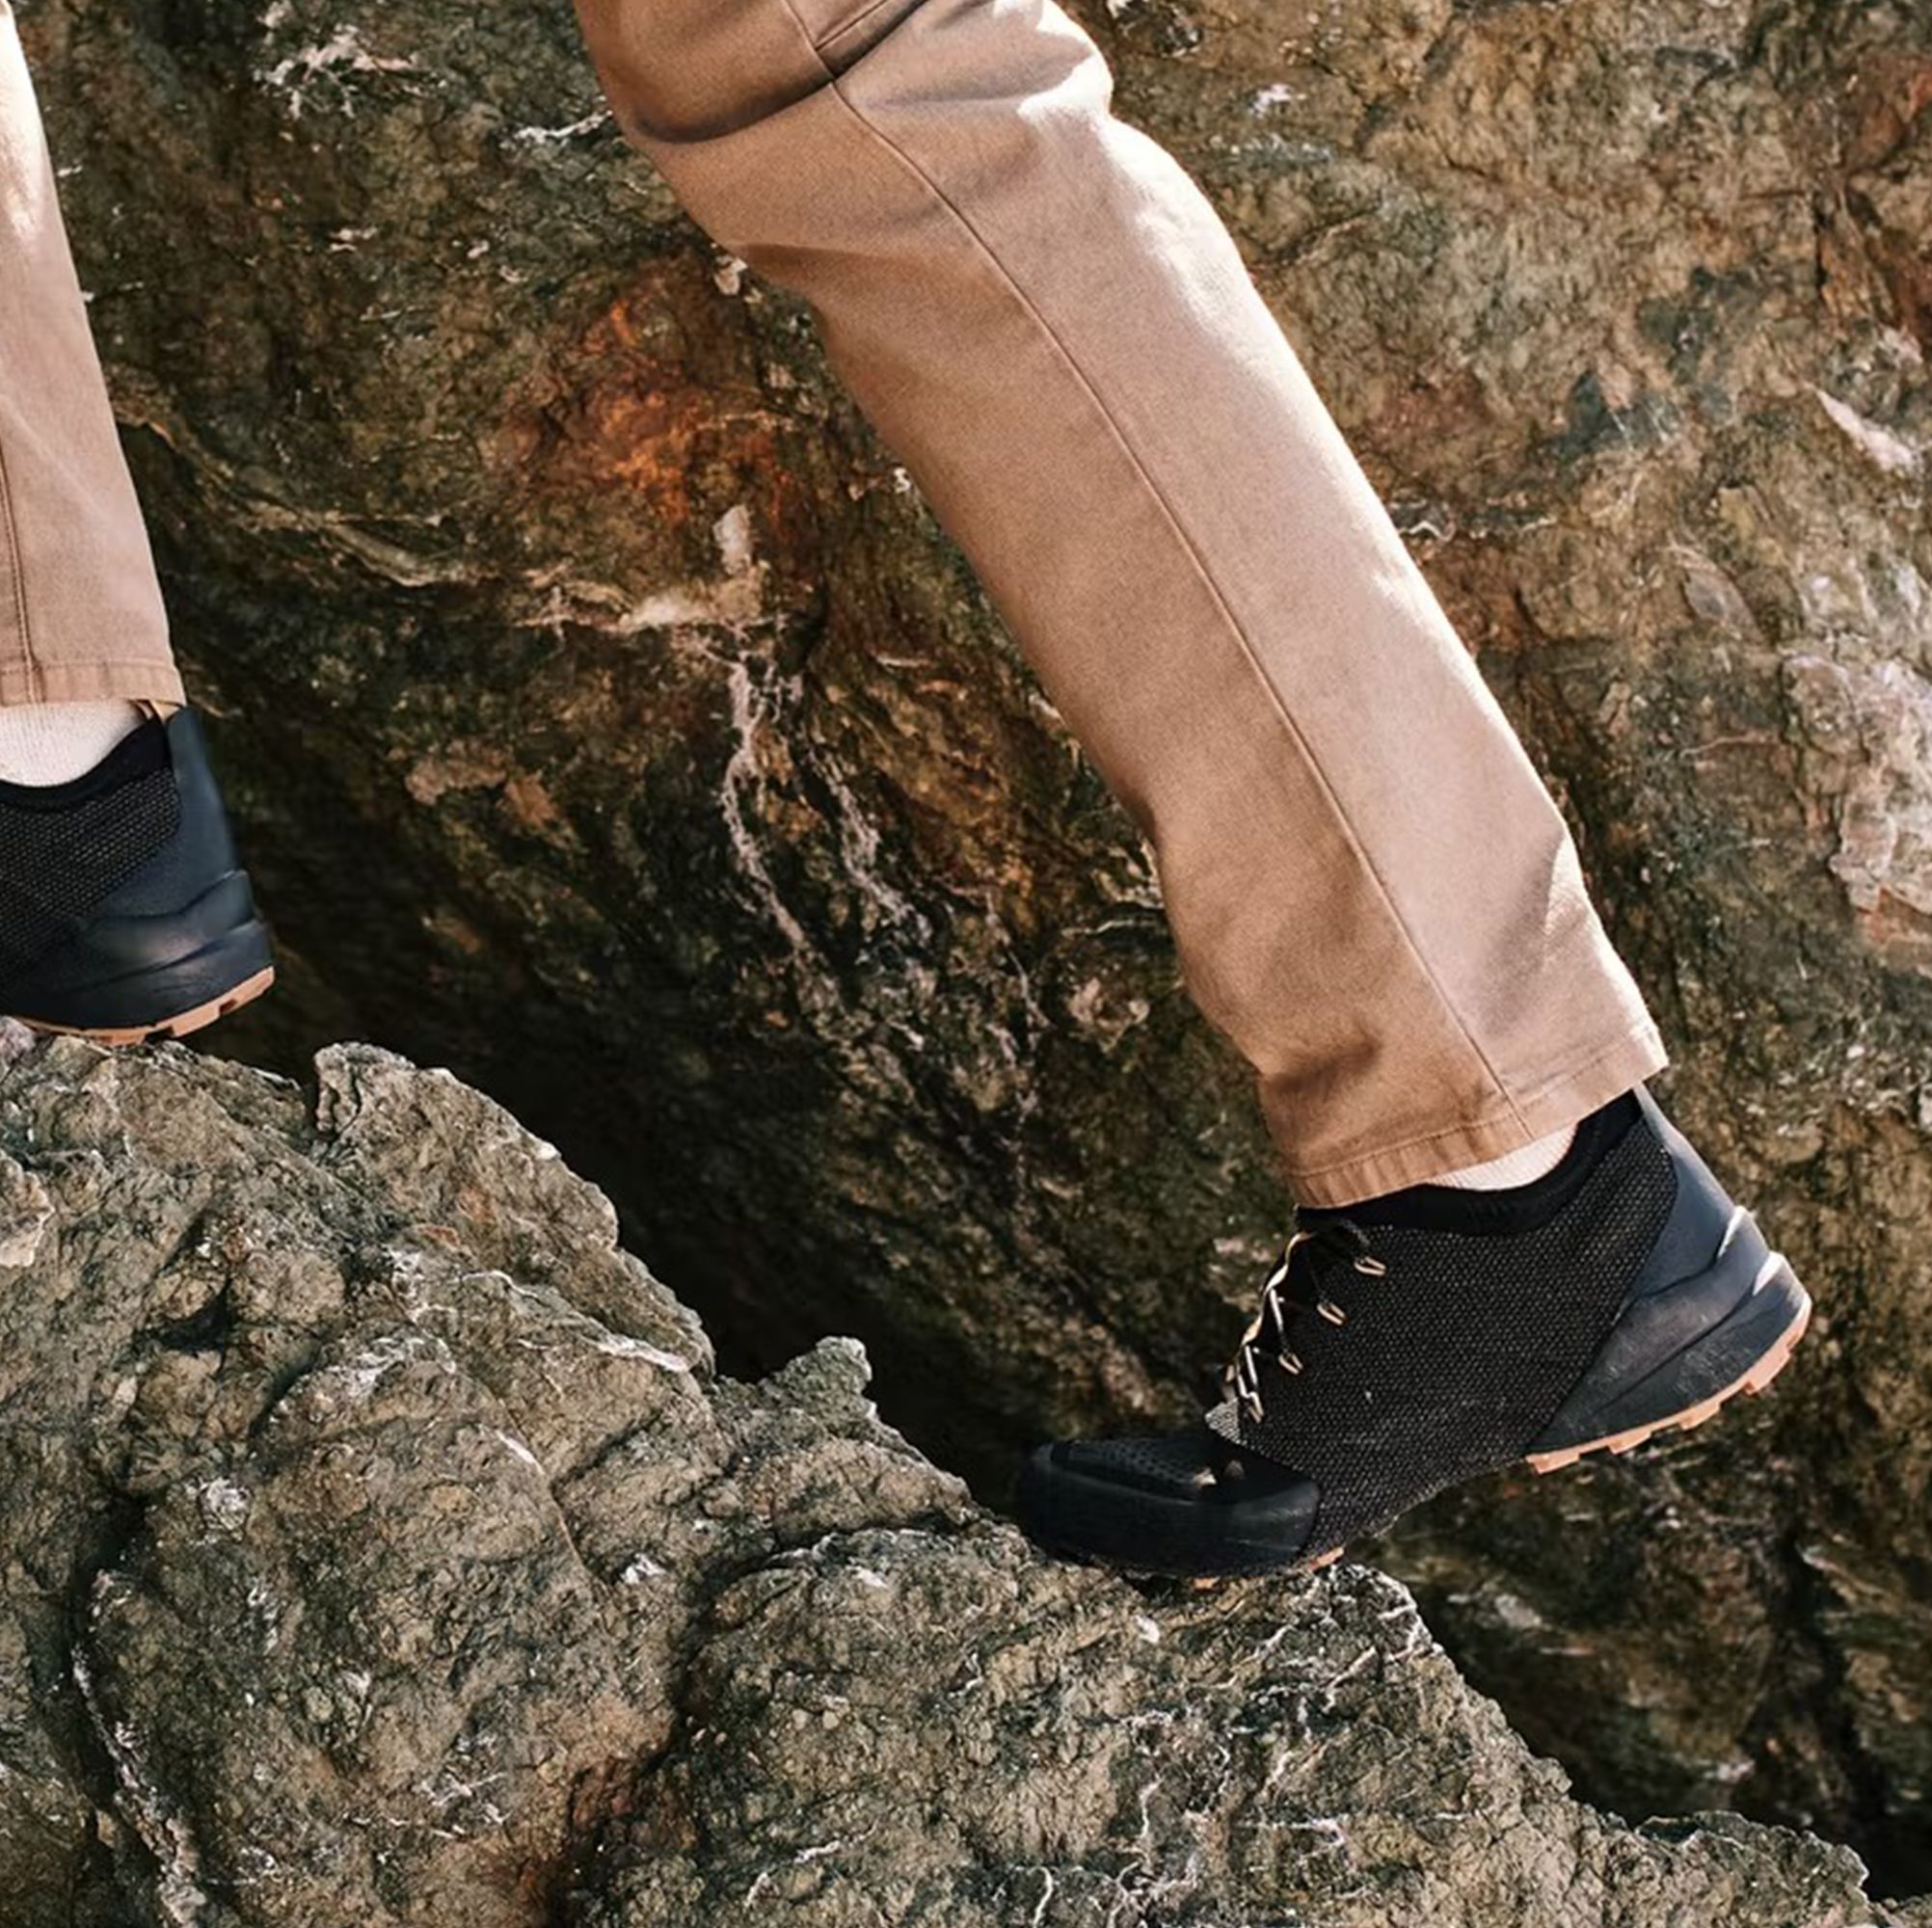 Naglev's Exclusive New Hiking Shoe Is Selling Out Fast